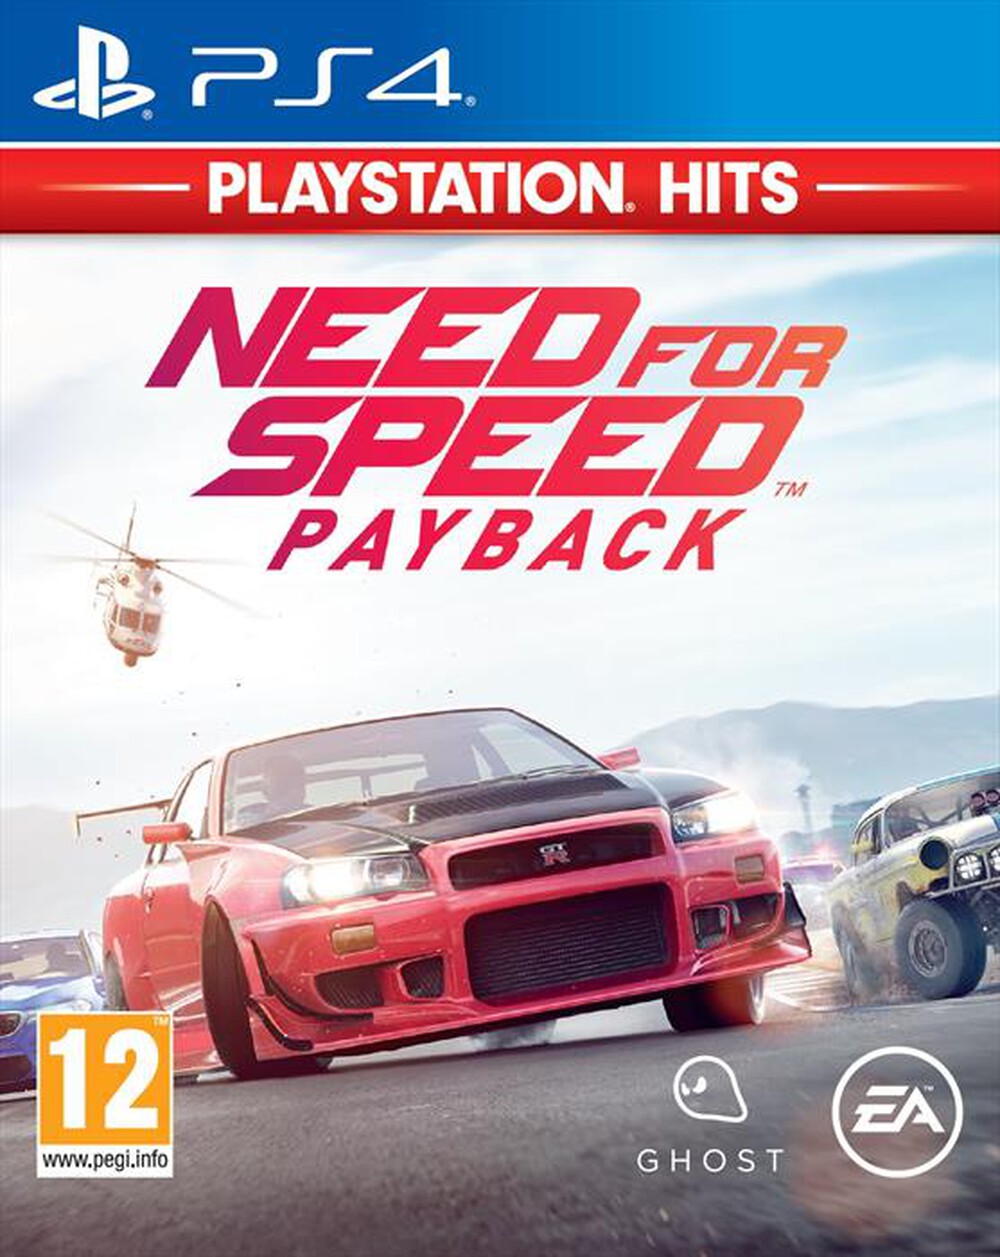 "ELECTRONIC ARTS - NEED FOR SPEED PAYBACK HITS"